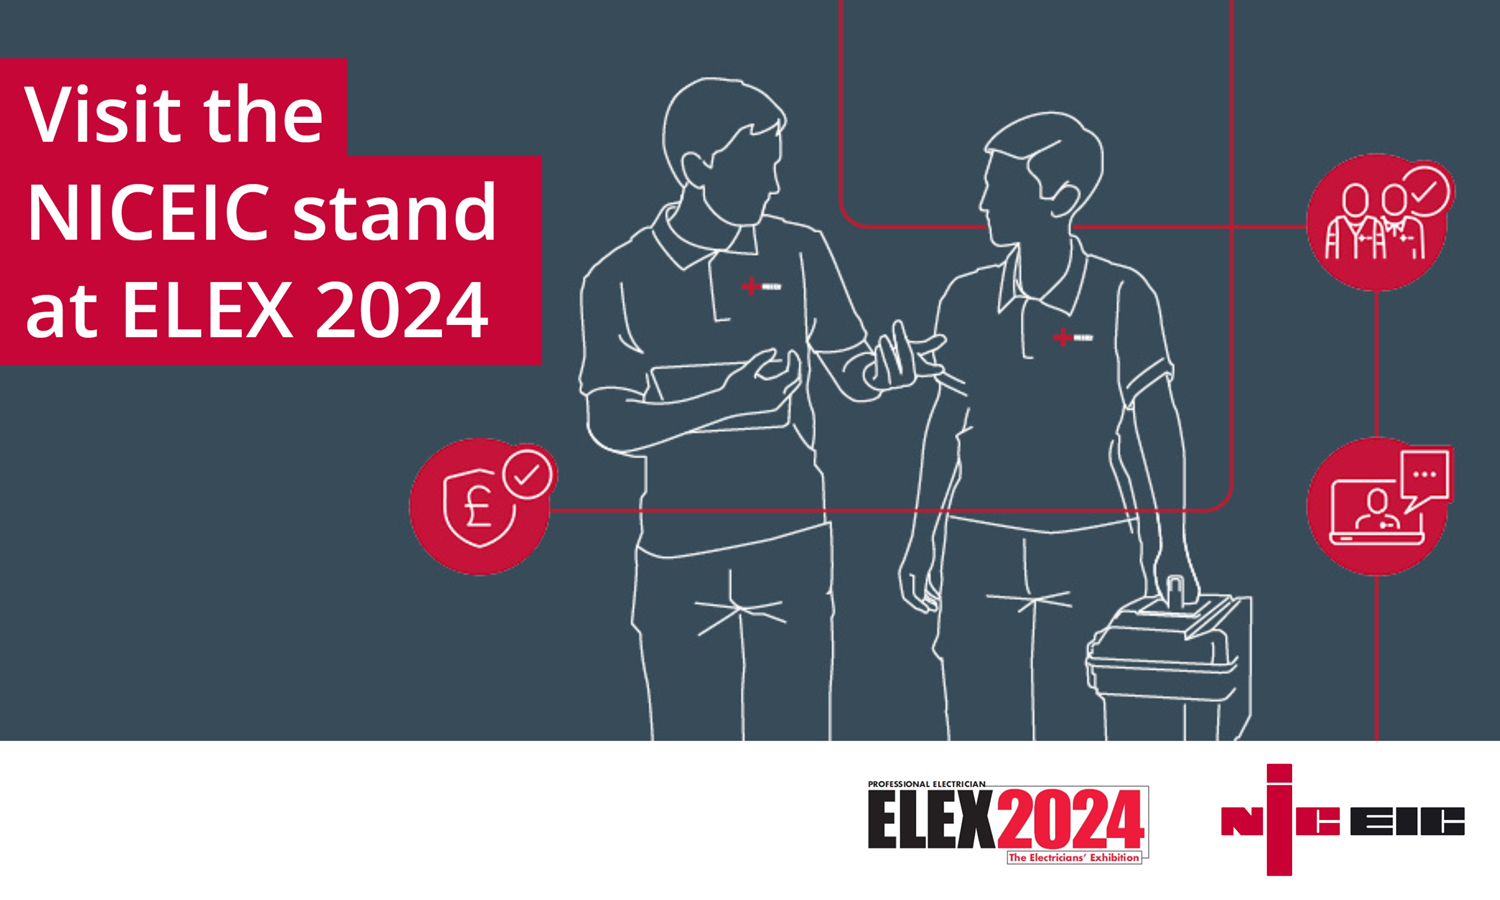 NICEIC image showing the return to Elex 2024.